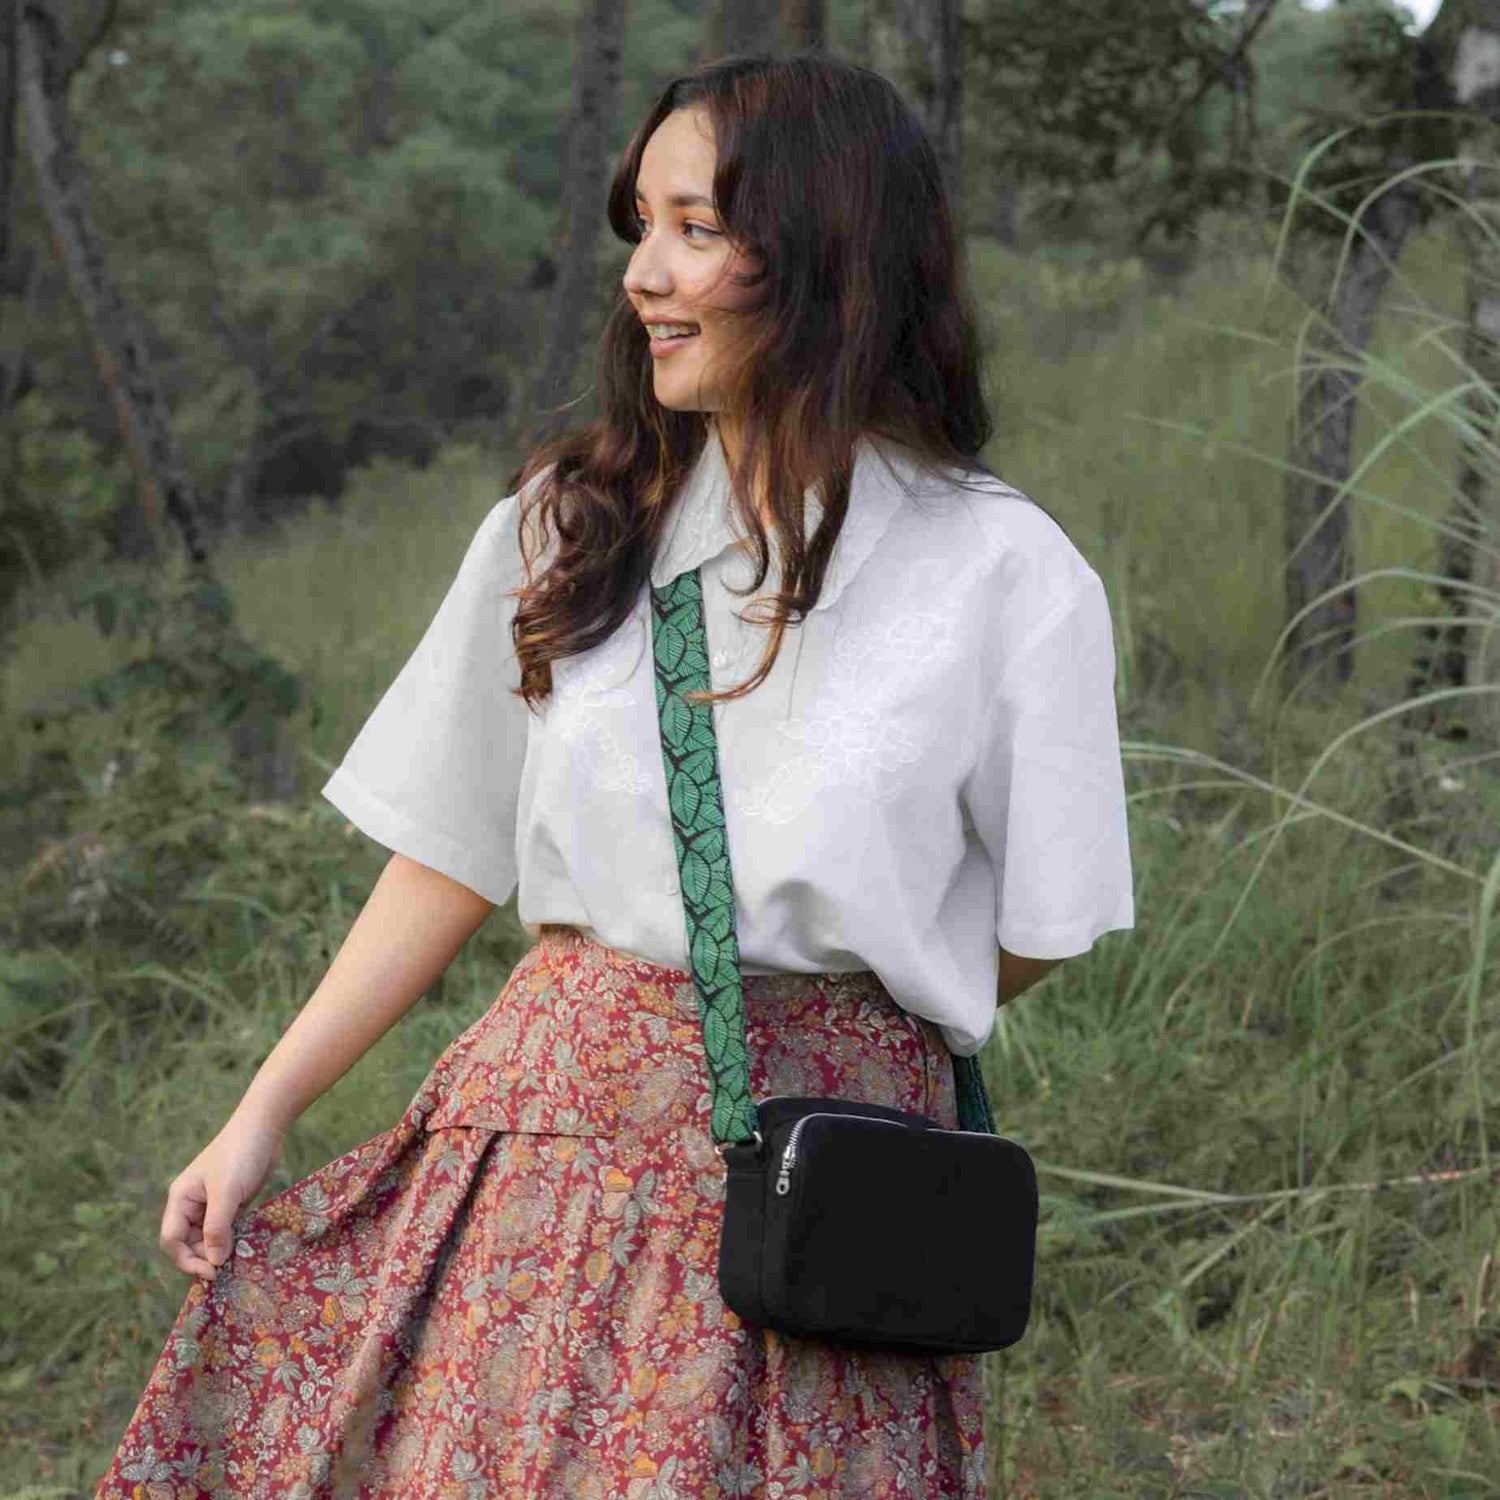 A girl with a box sling bag. She is wearing a white shirt with printed skirt and carrying black leaves box sling bag